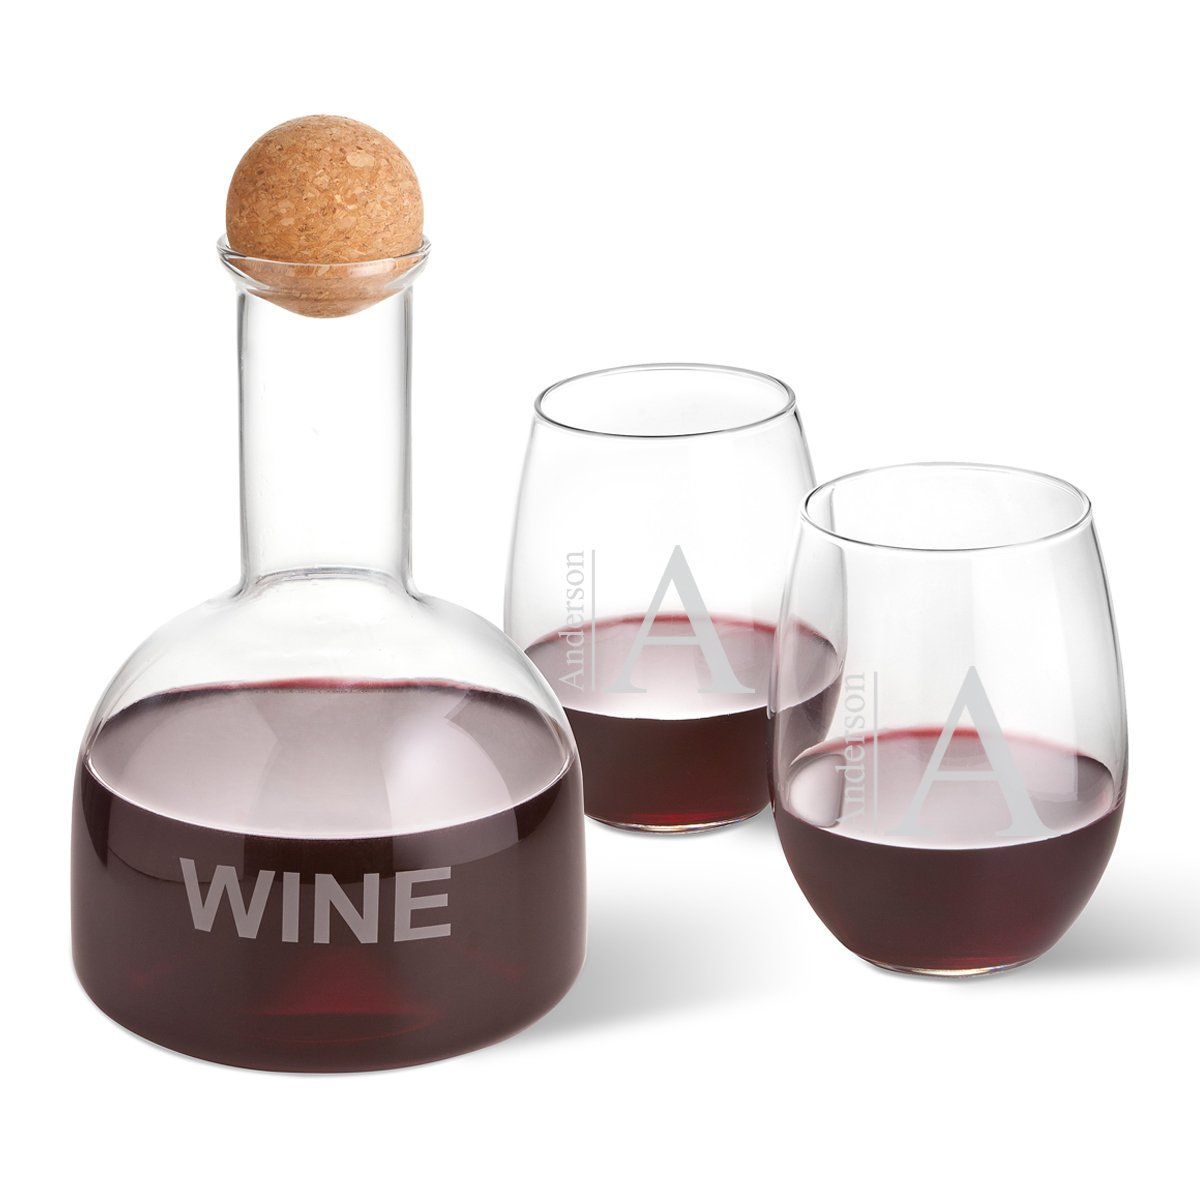 Personalized Wine Decanter in Wood Crate with set of 2 Stemless Wine Glasses